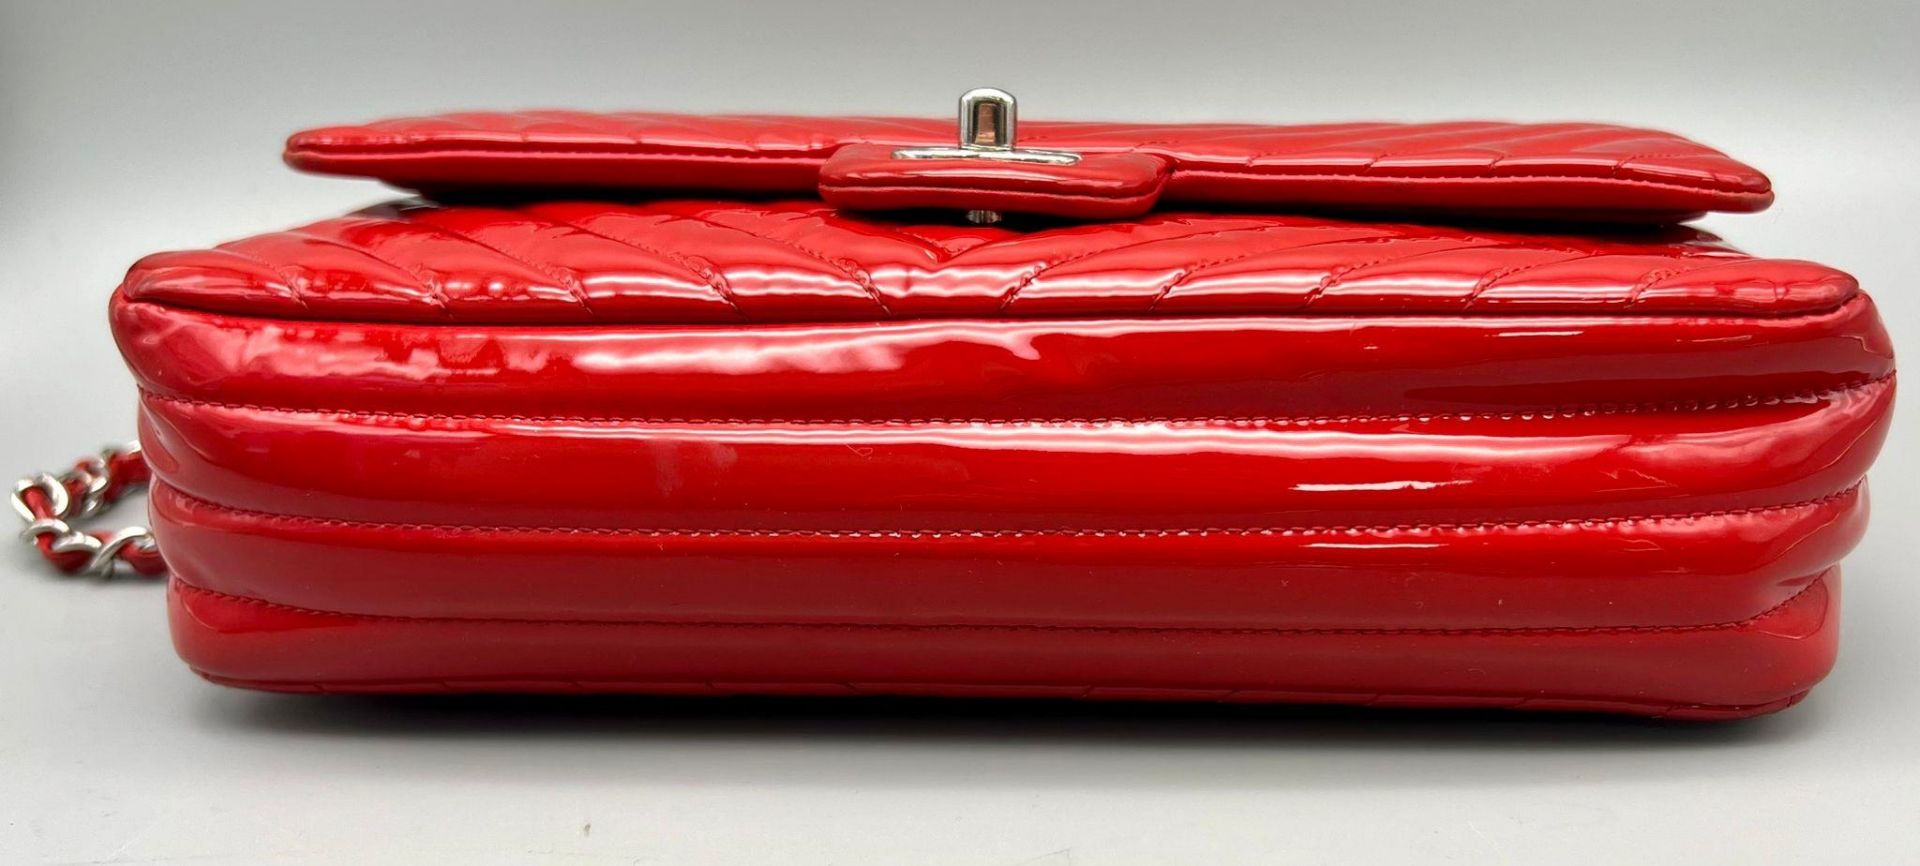 A Chanel Patent Leather Flap Handbag. Bright red patent leather quilted exterior. Classic Chanel - Bild 4 aus 7